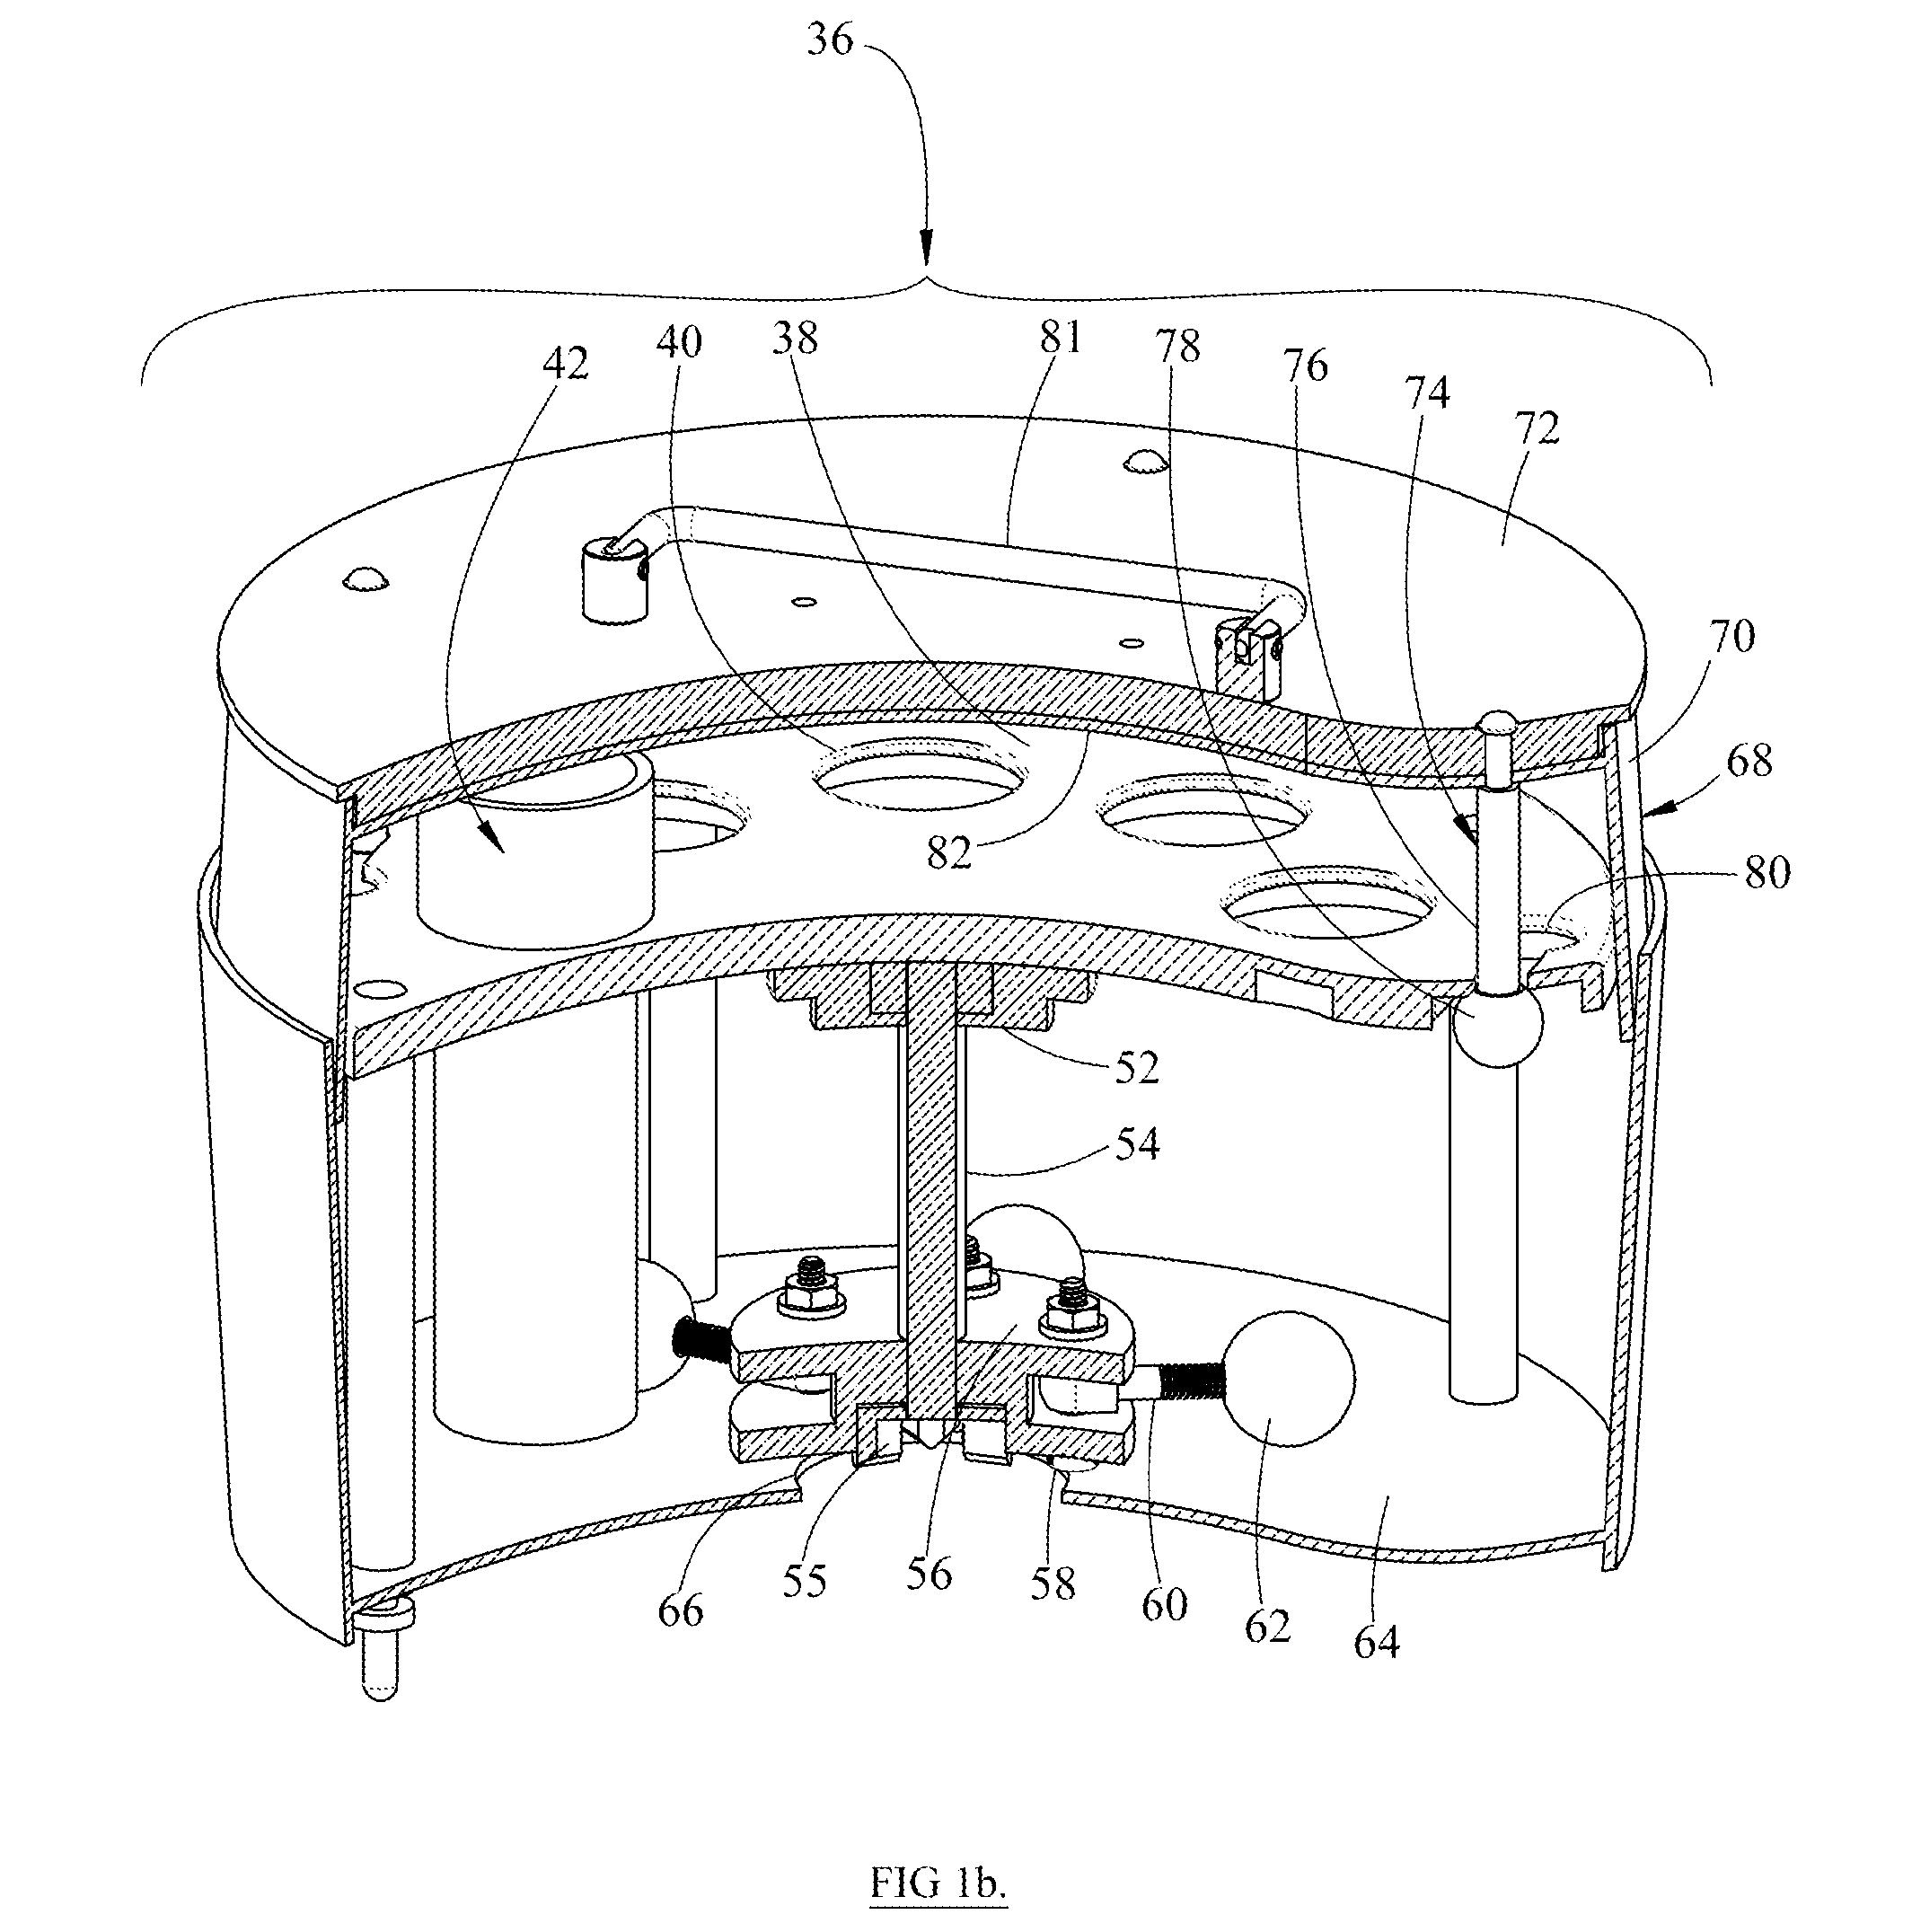 Agitation Apparatus with Interchangeable Module and Impact Protection Using Reactive Feedback Control